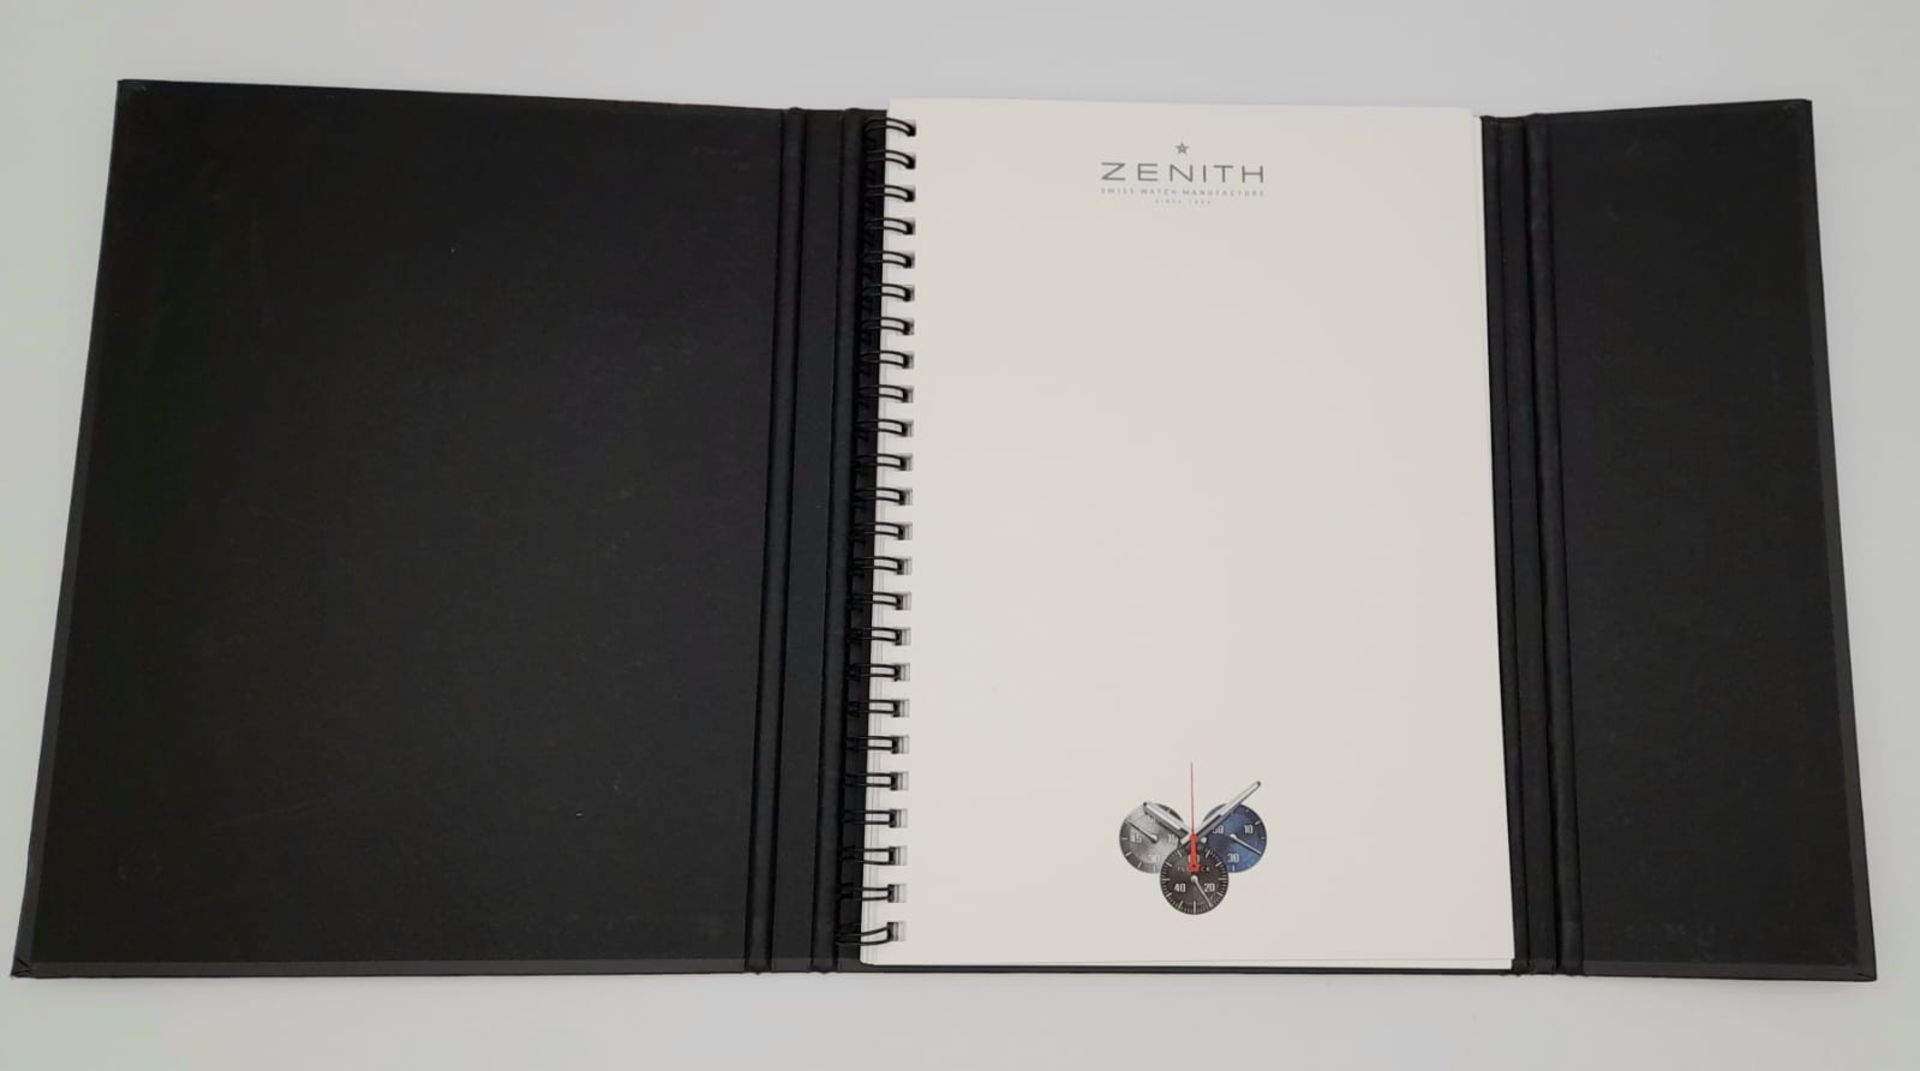 COLLECTION OF 2X ZENITH WATCH COMPANY NOTEBOOKS WITH A ZENITH BOOKMARK - Image 10 of 16